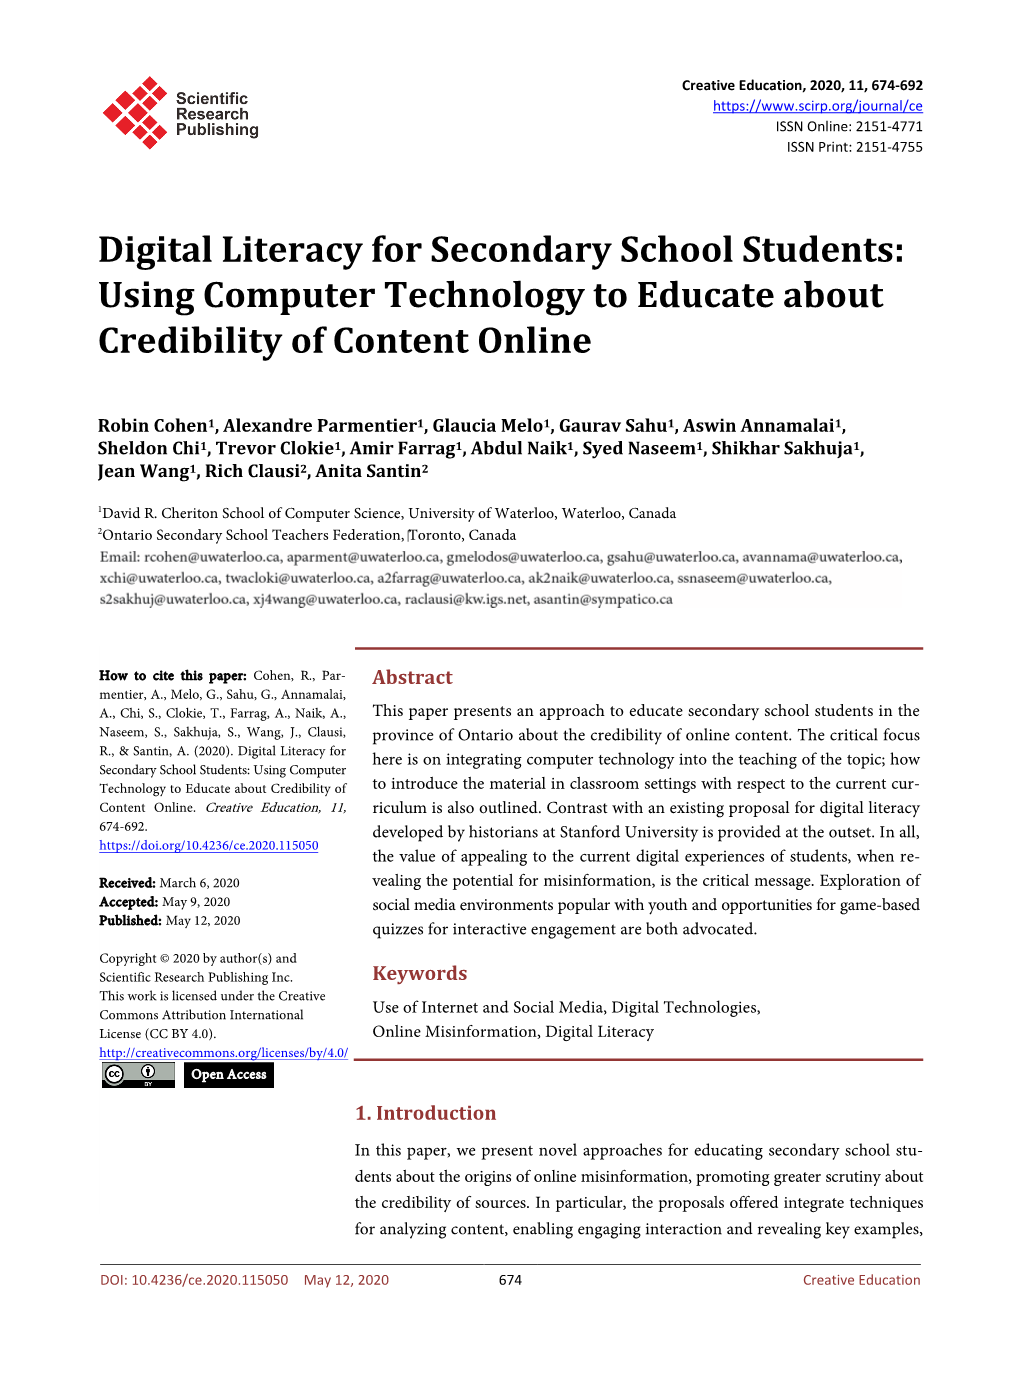 Digital Literacy for Secondary School Students: Using Computer Technology to Educate About Credibility of Content Online